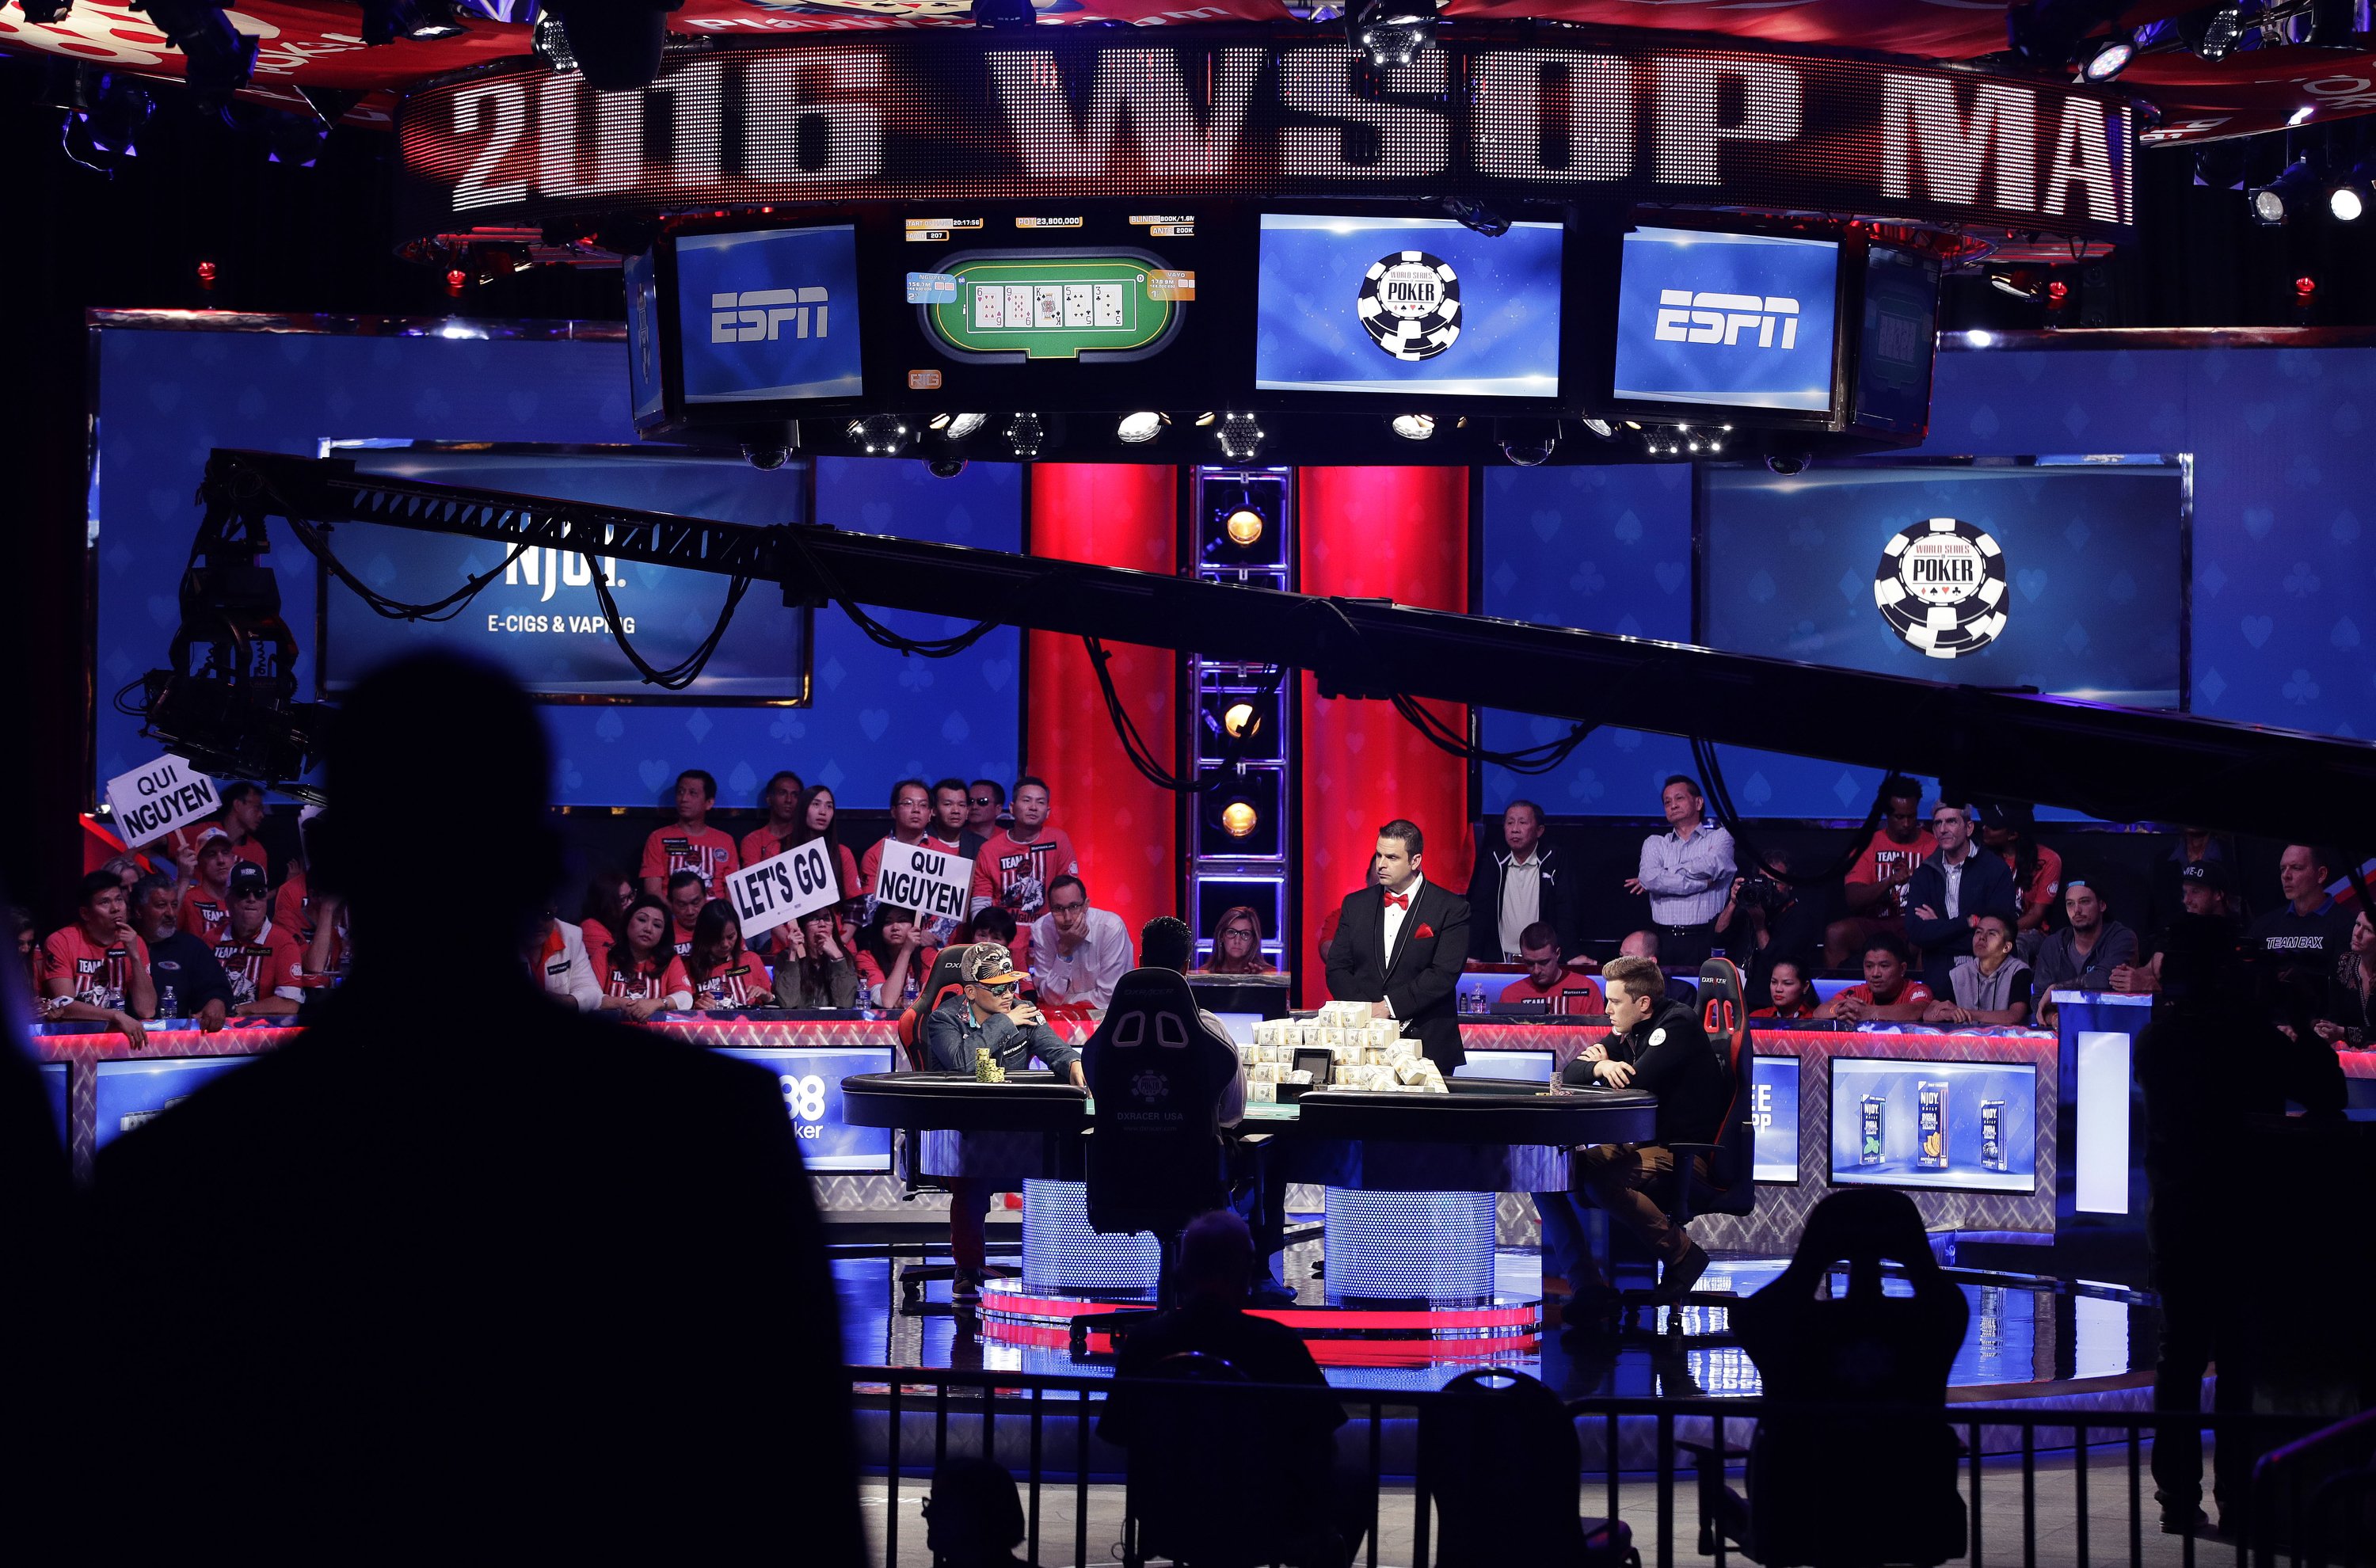 World Series of Poker final table to be played in July AP News